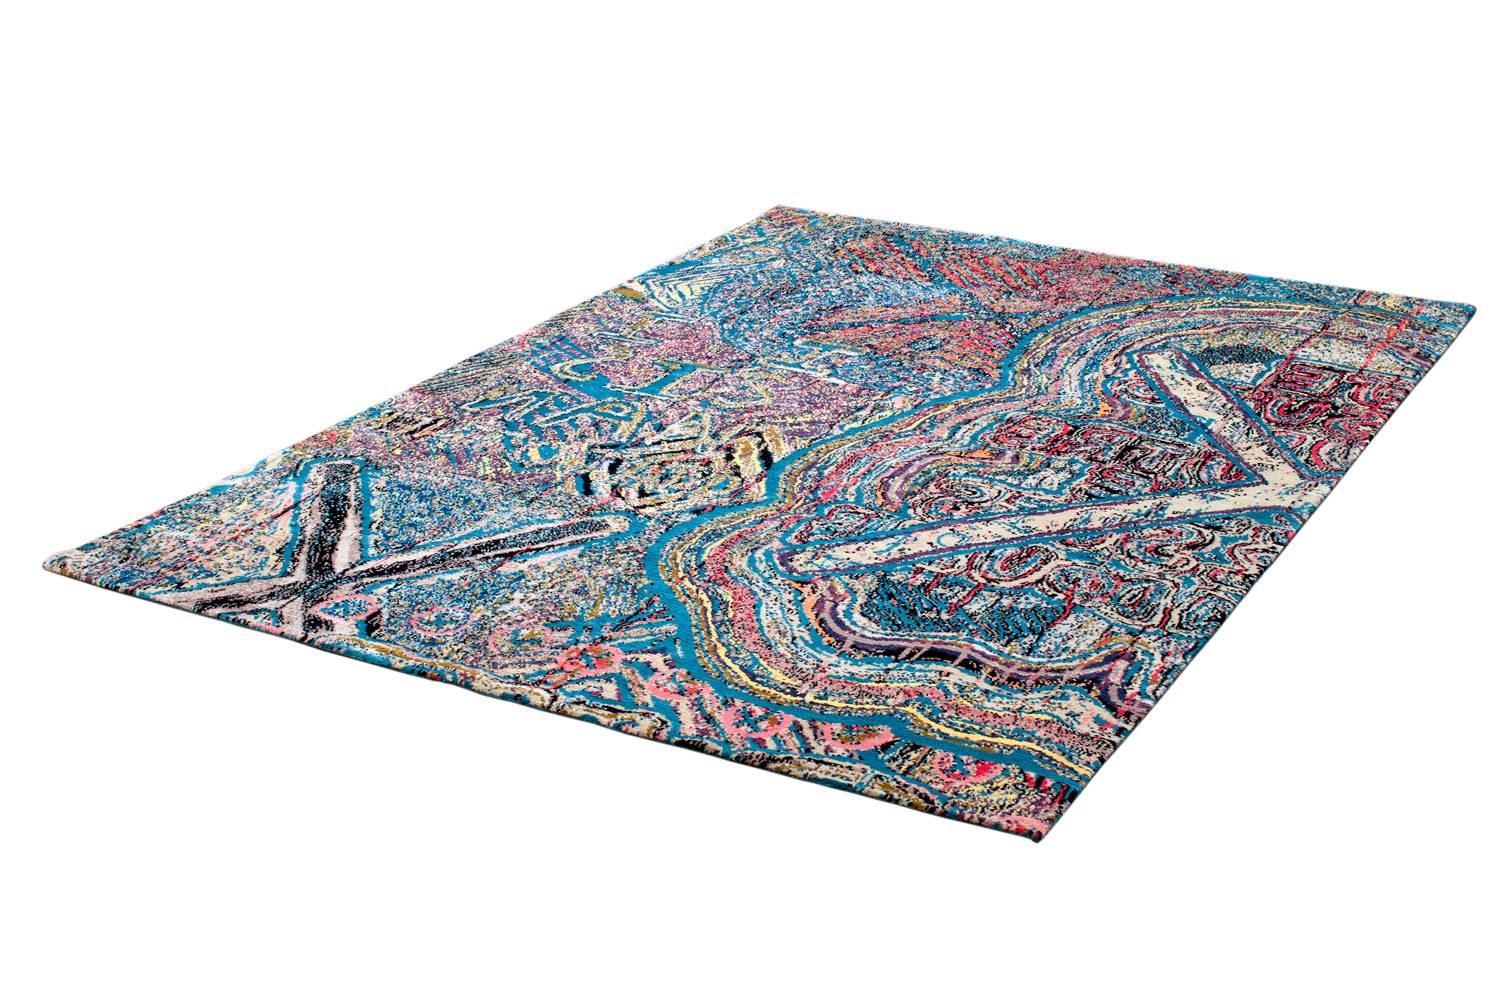 A highly detailed and complex design handwoven in Nepal using traditional Tibetan knotting techniques. The energetic colorful design is similar to that of an impressionist painting. The dominant hue is a popsicle blue but bursts of pink and yellow